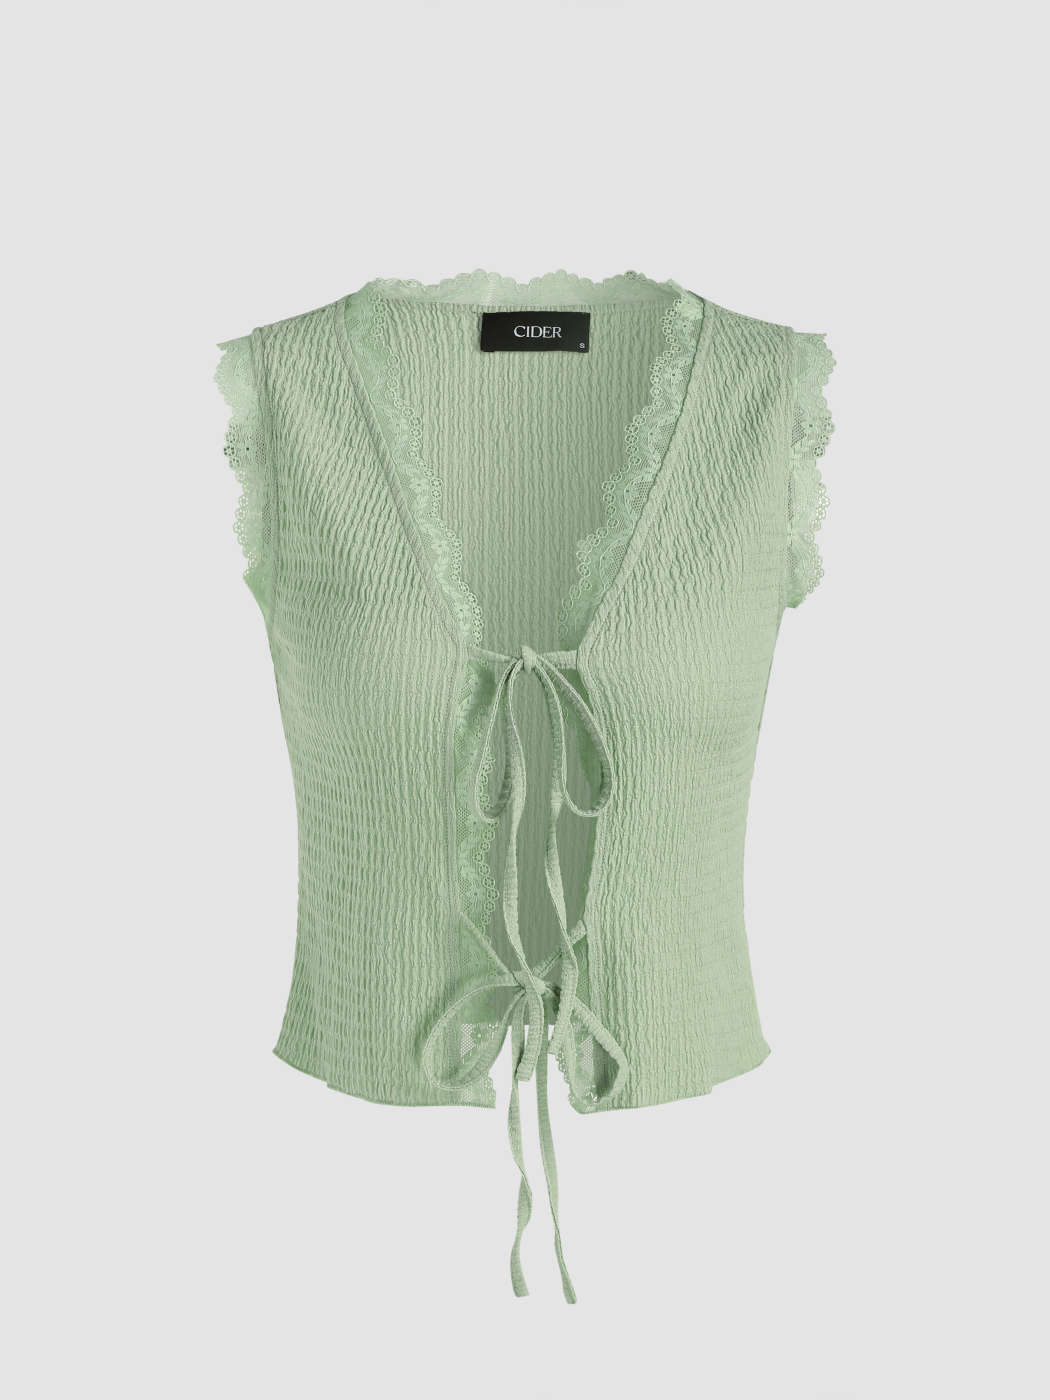 Ruffle Lace Tank Top - Cider